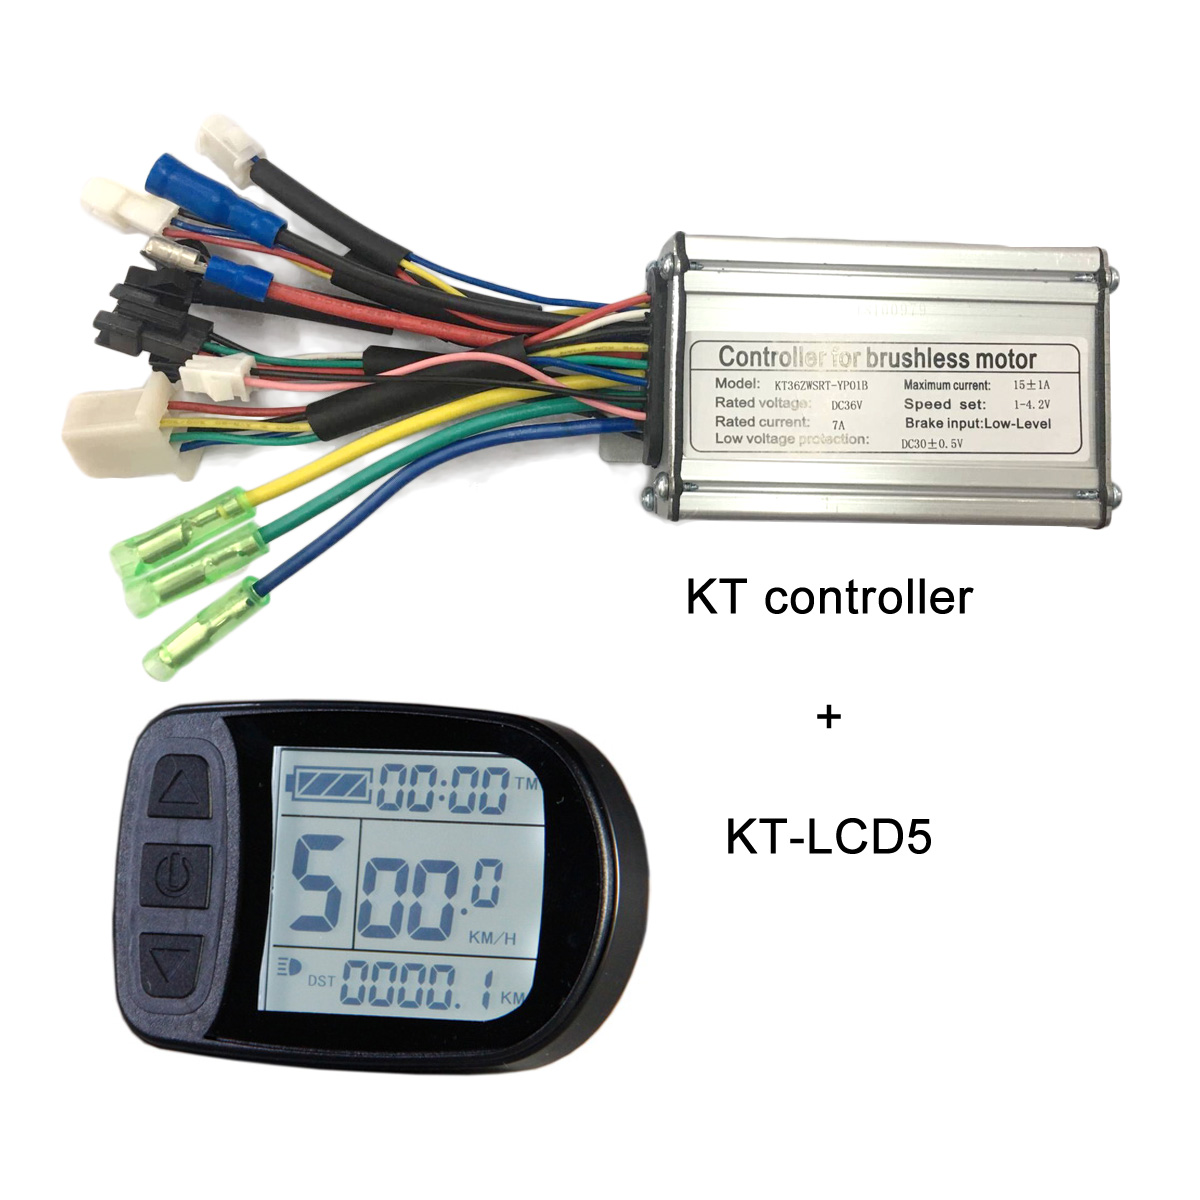 KT controllers wit KT-LCD5 electric bike display